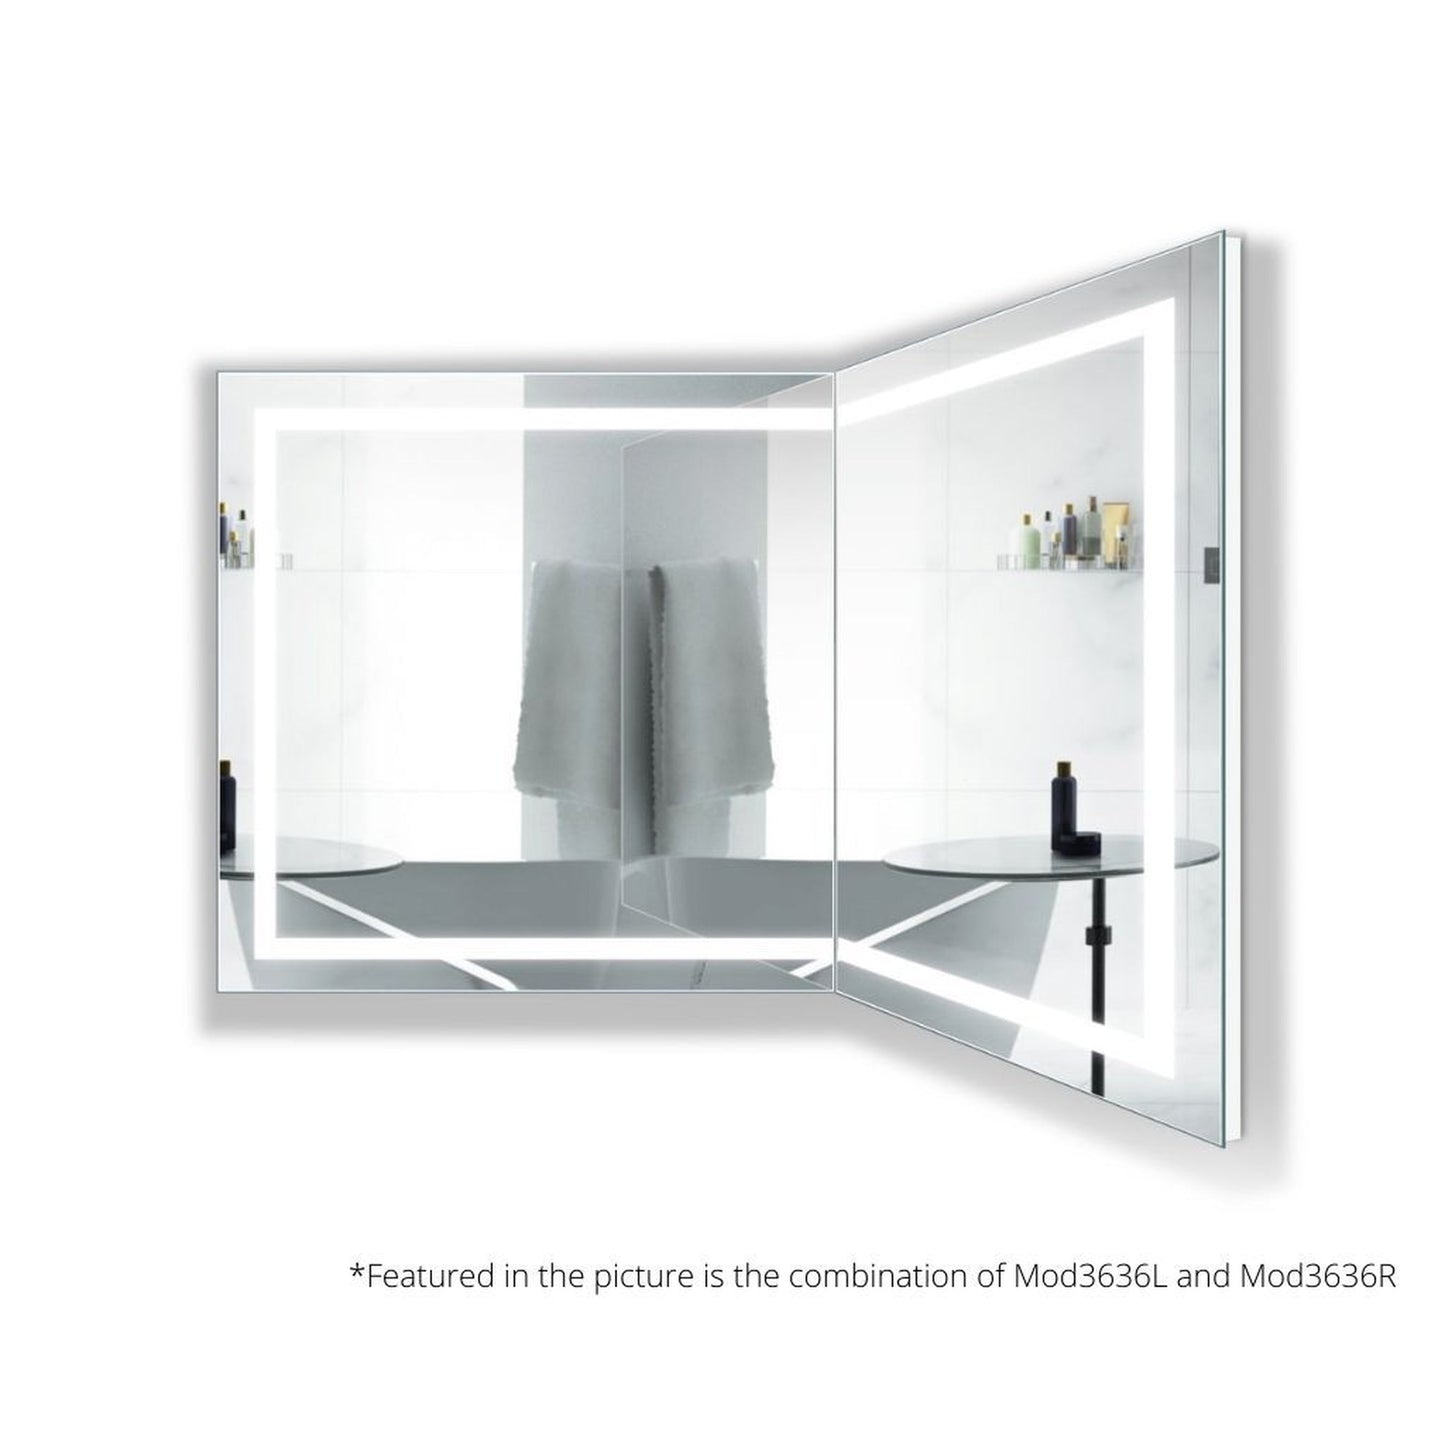 Krugg Reflections Mod 36" x 36" 5000K Square Right Configuration Wall-Mounted Silver-Backed LED Bathroom Vanity Mirror With Built-in Defogger and Dimmer